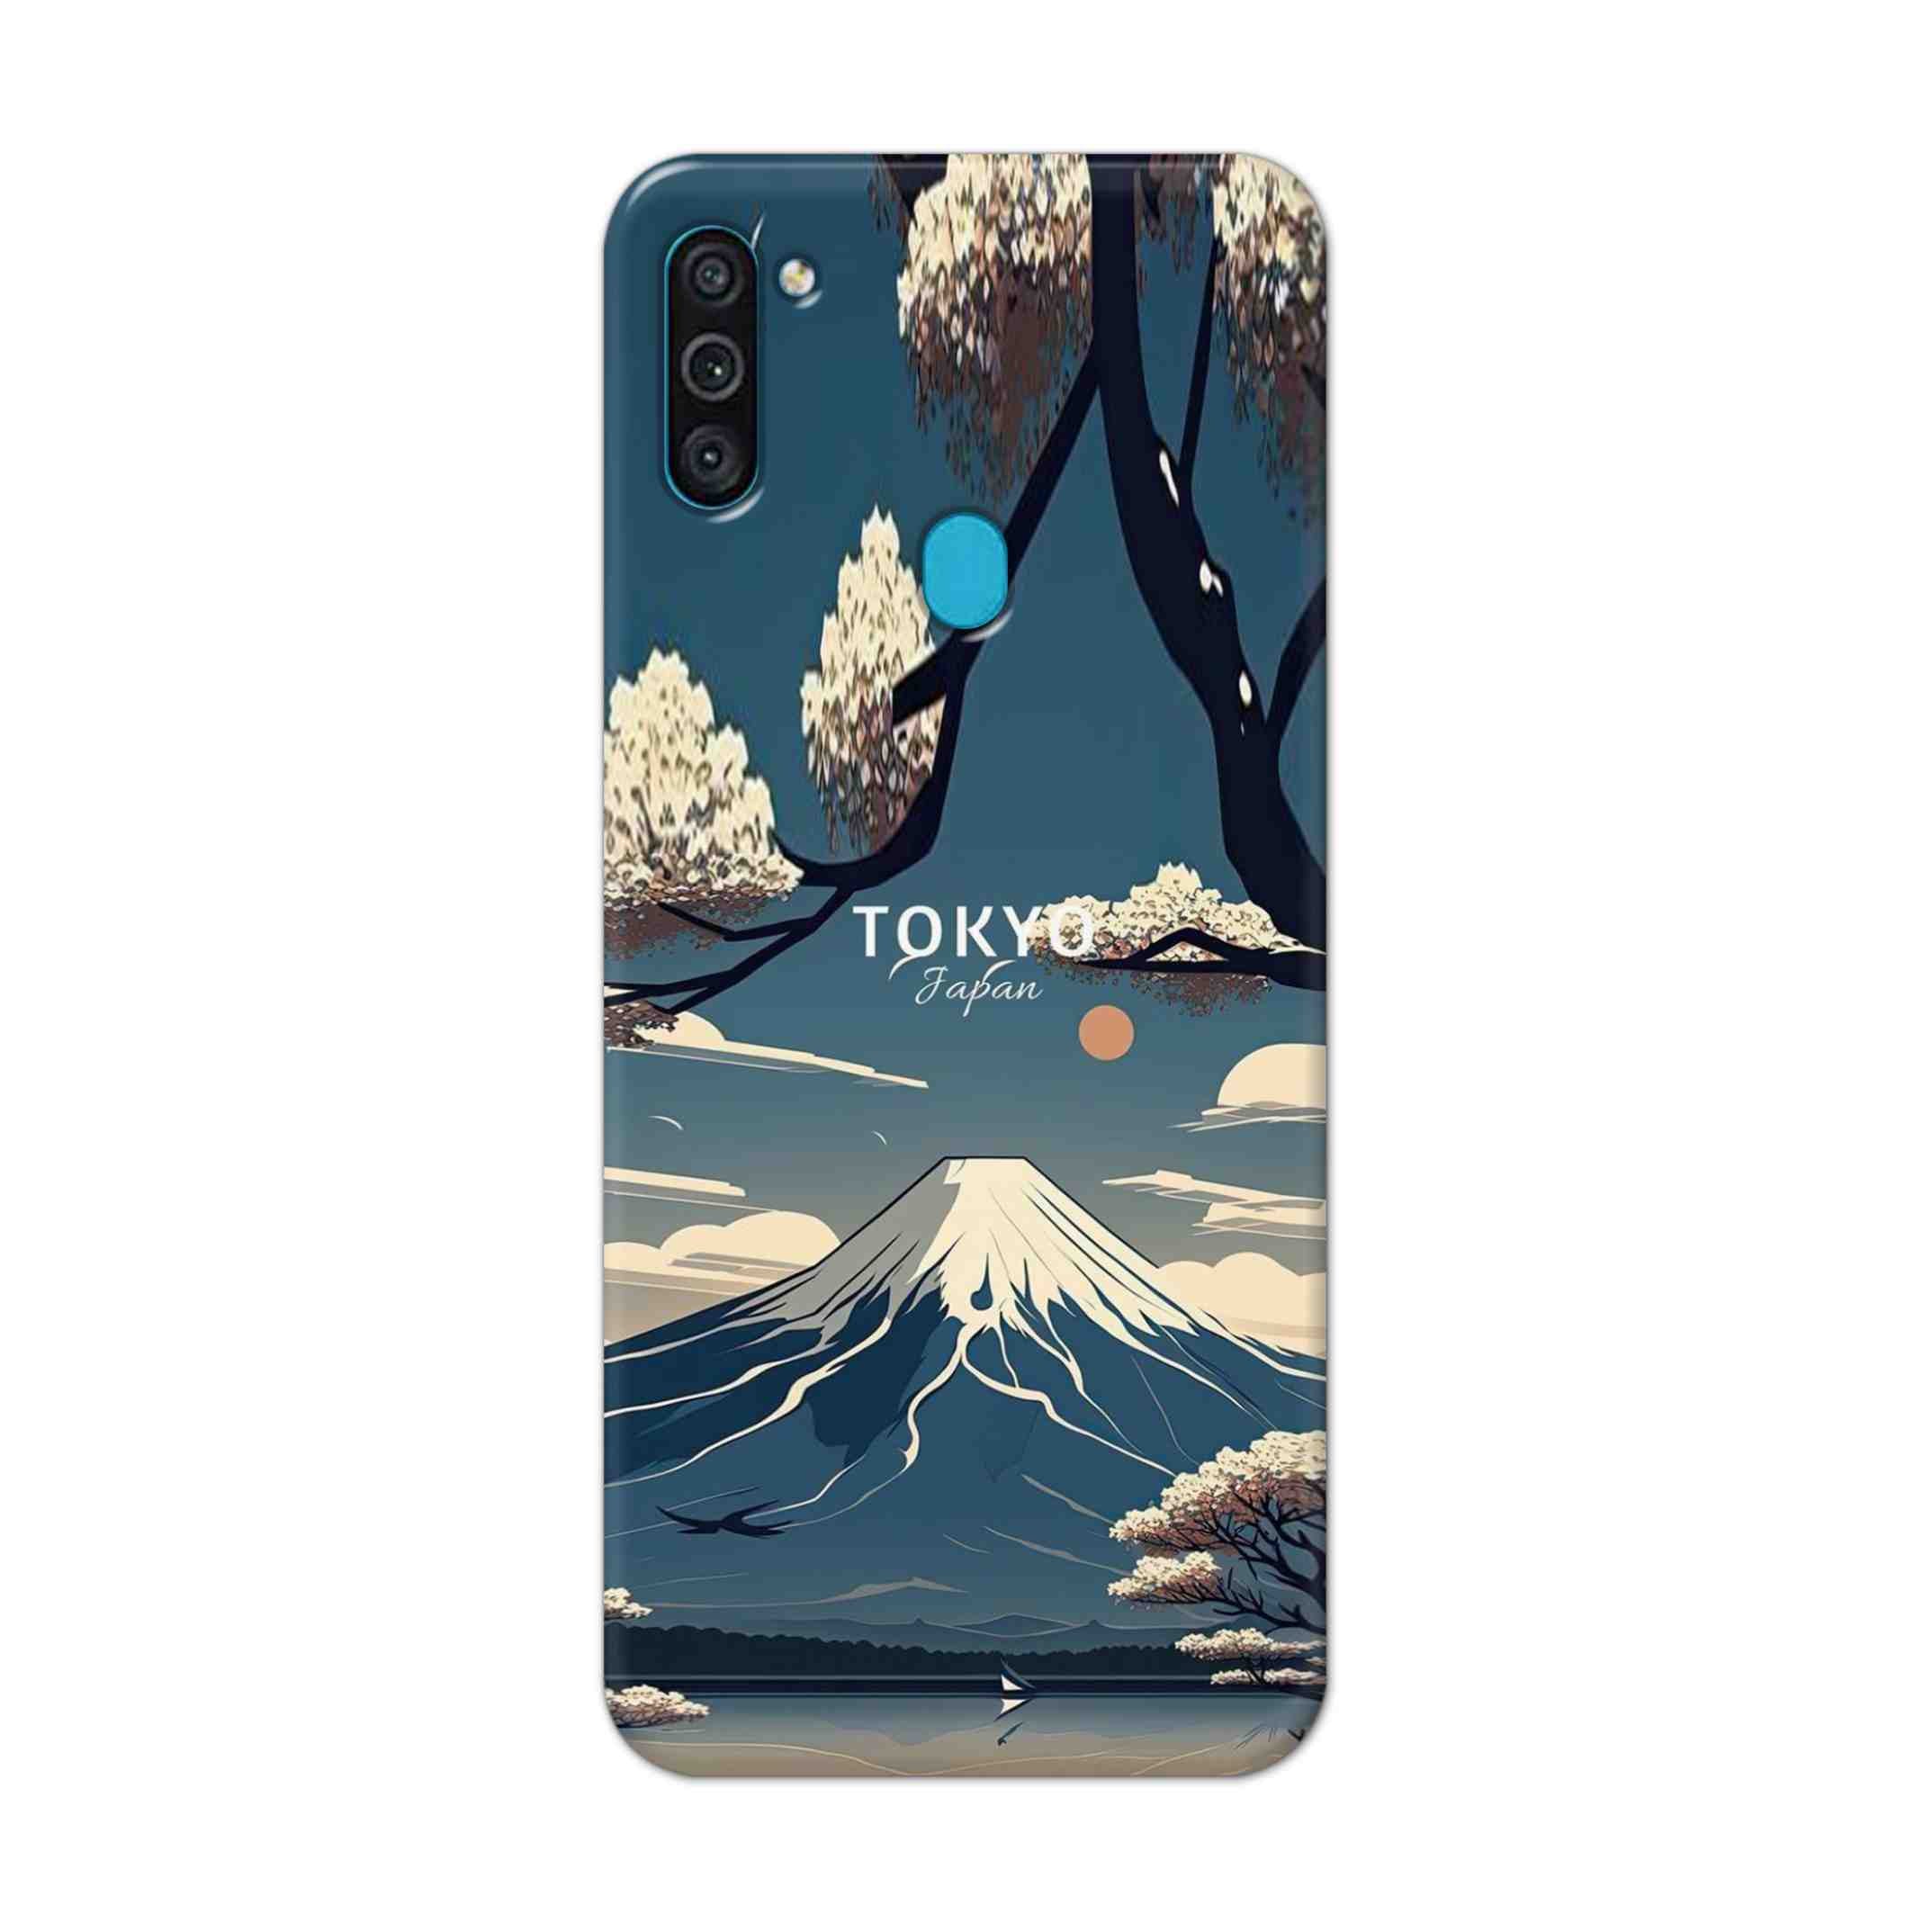 Buy Tokyo Hard Back Mobile Phone Case Cover For Samsung Galaxy M11 Online